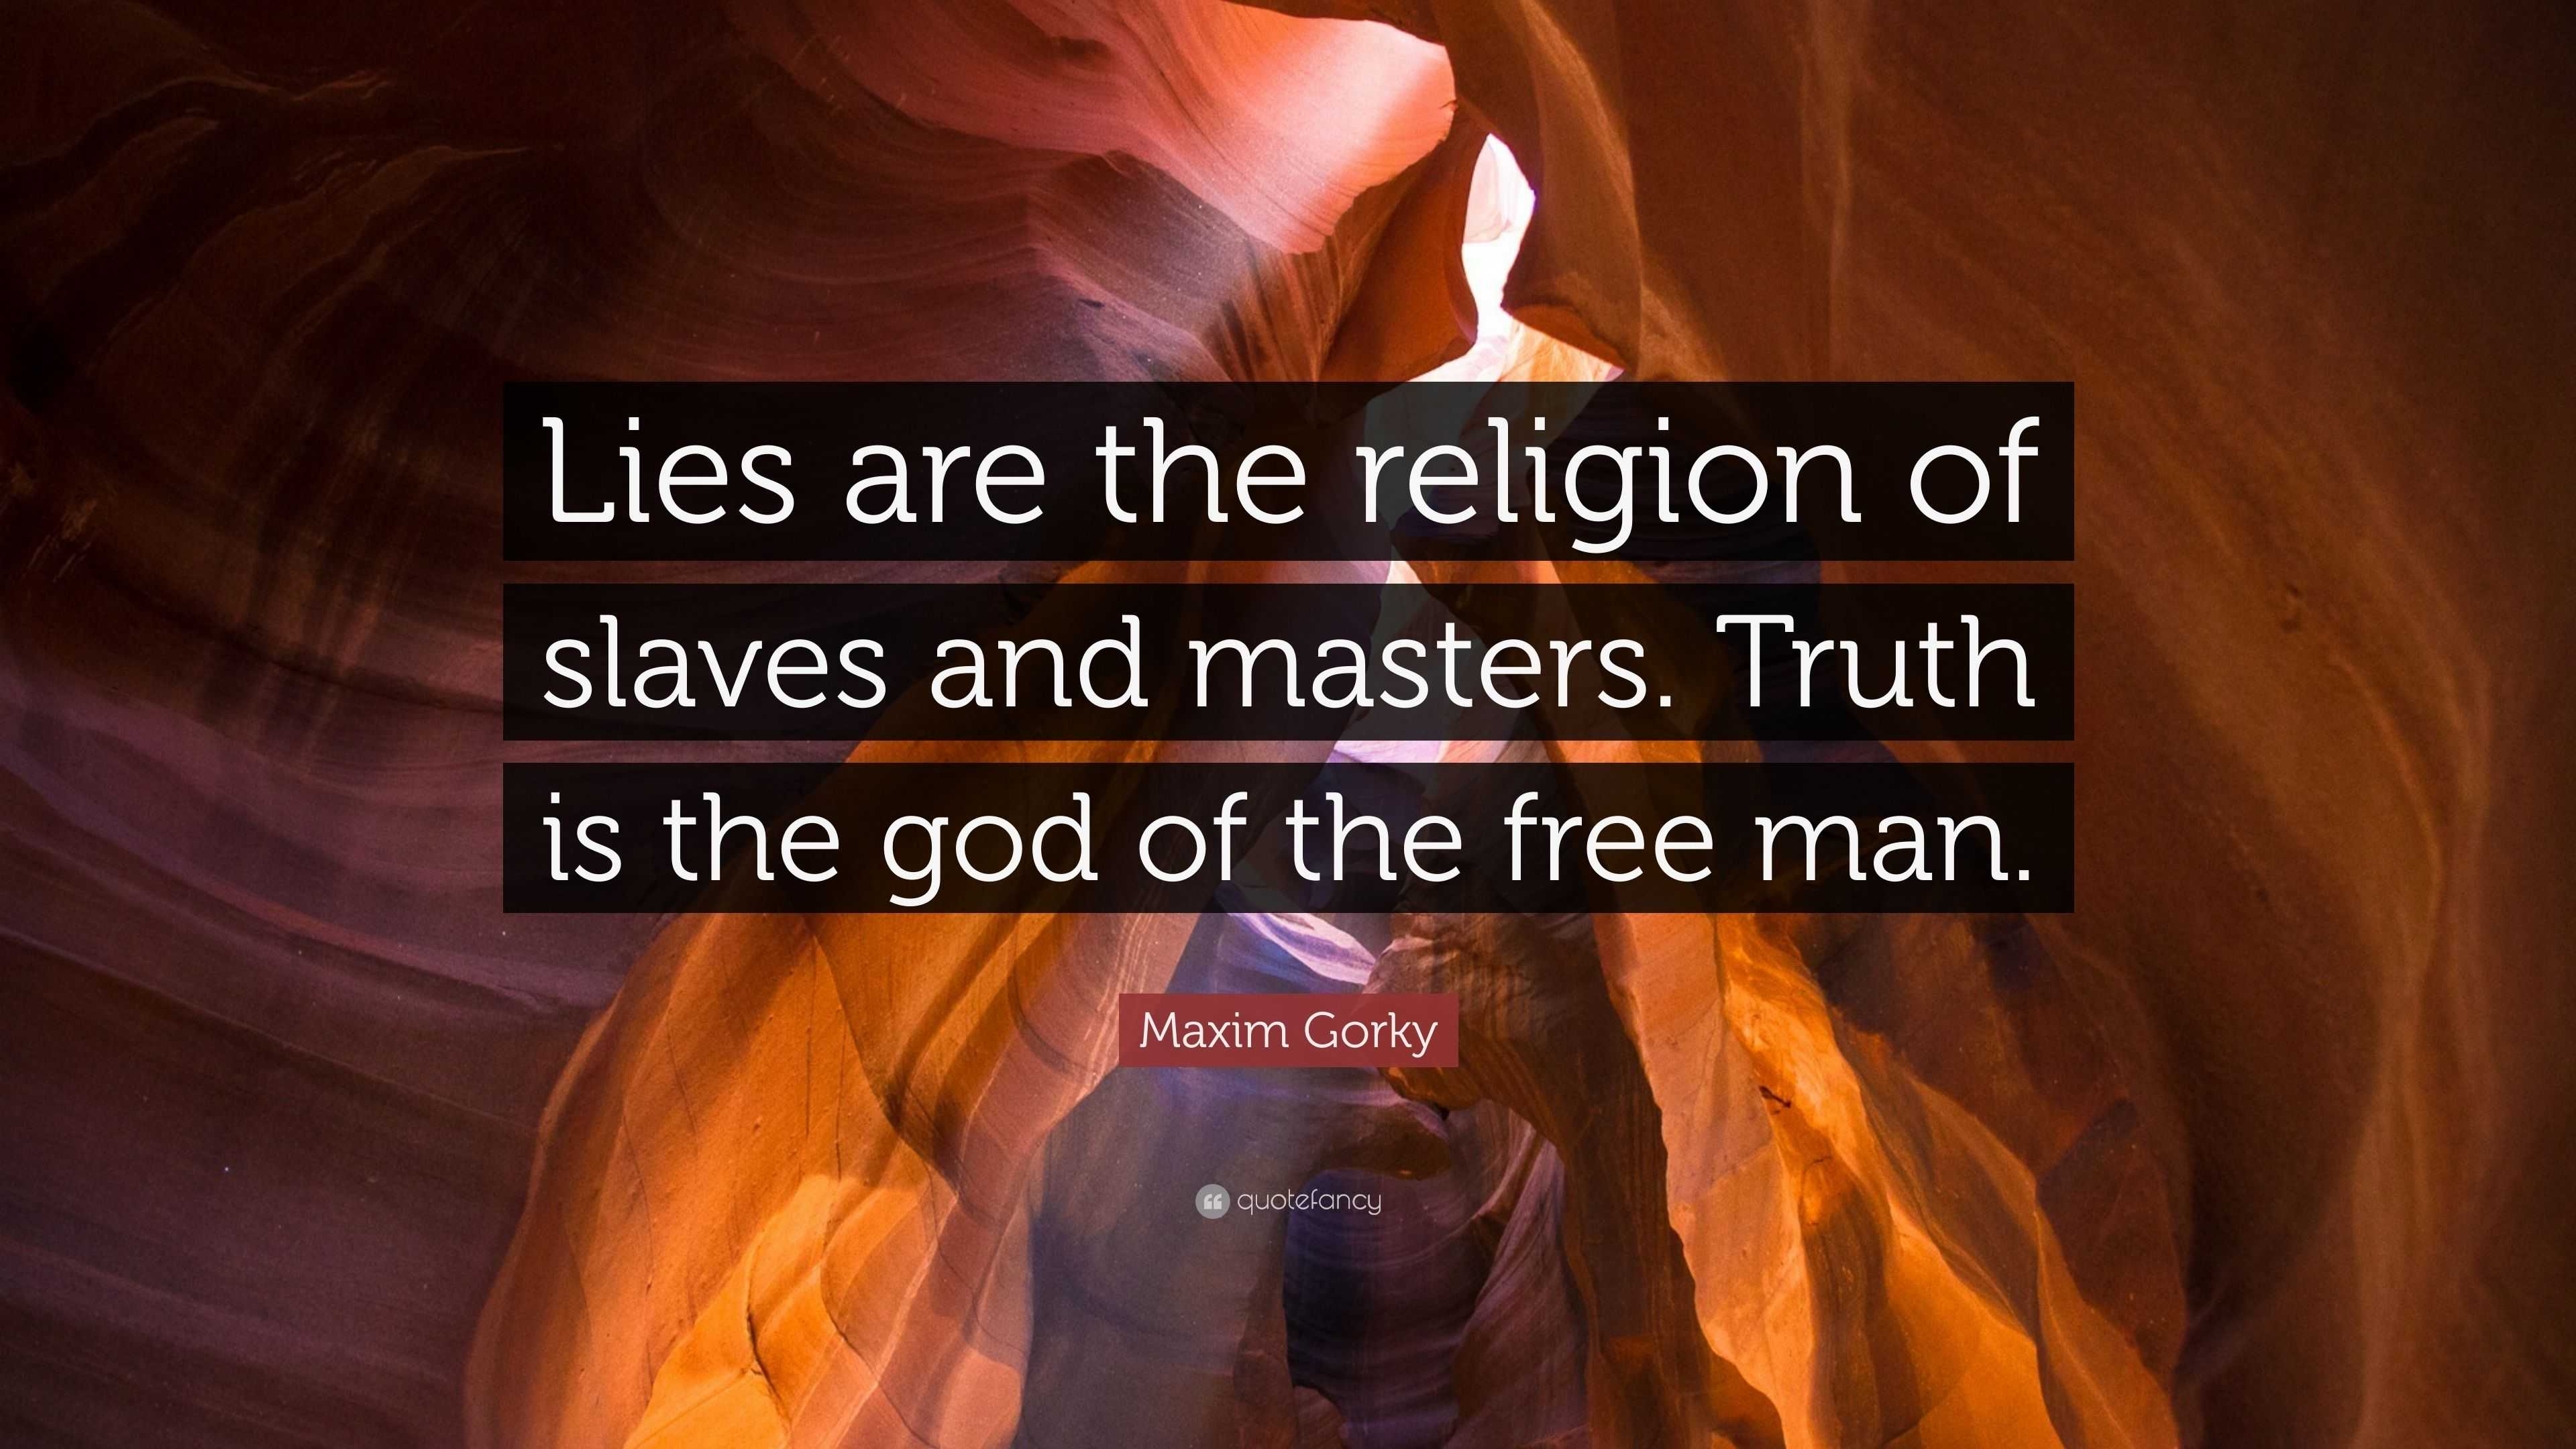 Maxim Gorky Quote: “Lies are the religion of slaves and masters. Truth ...